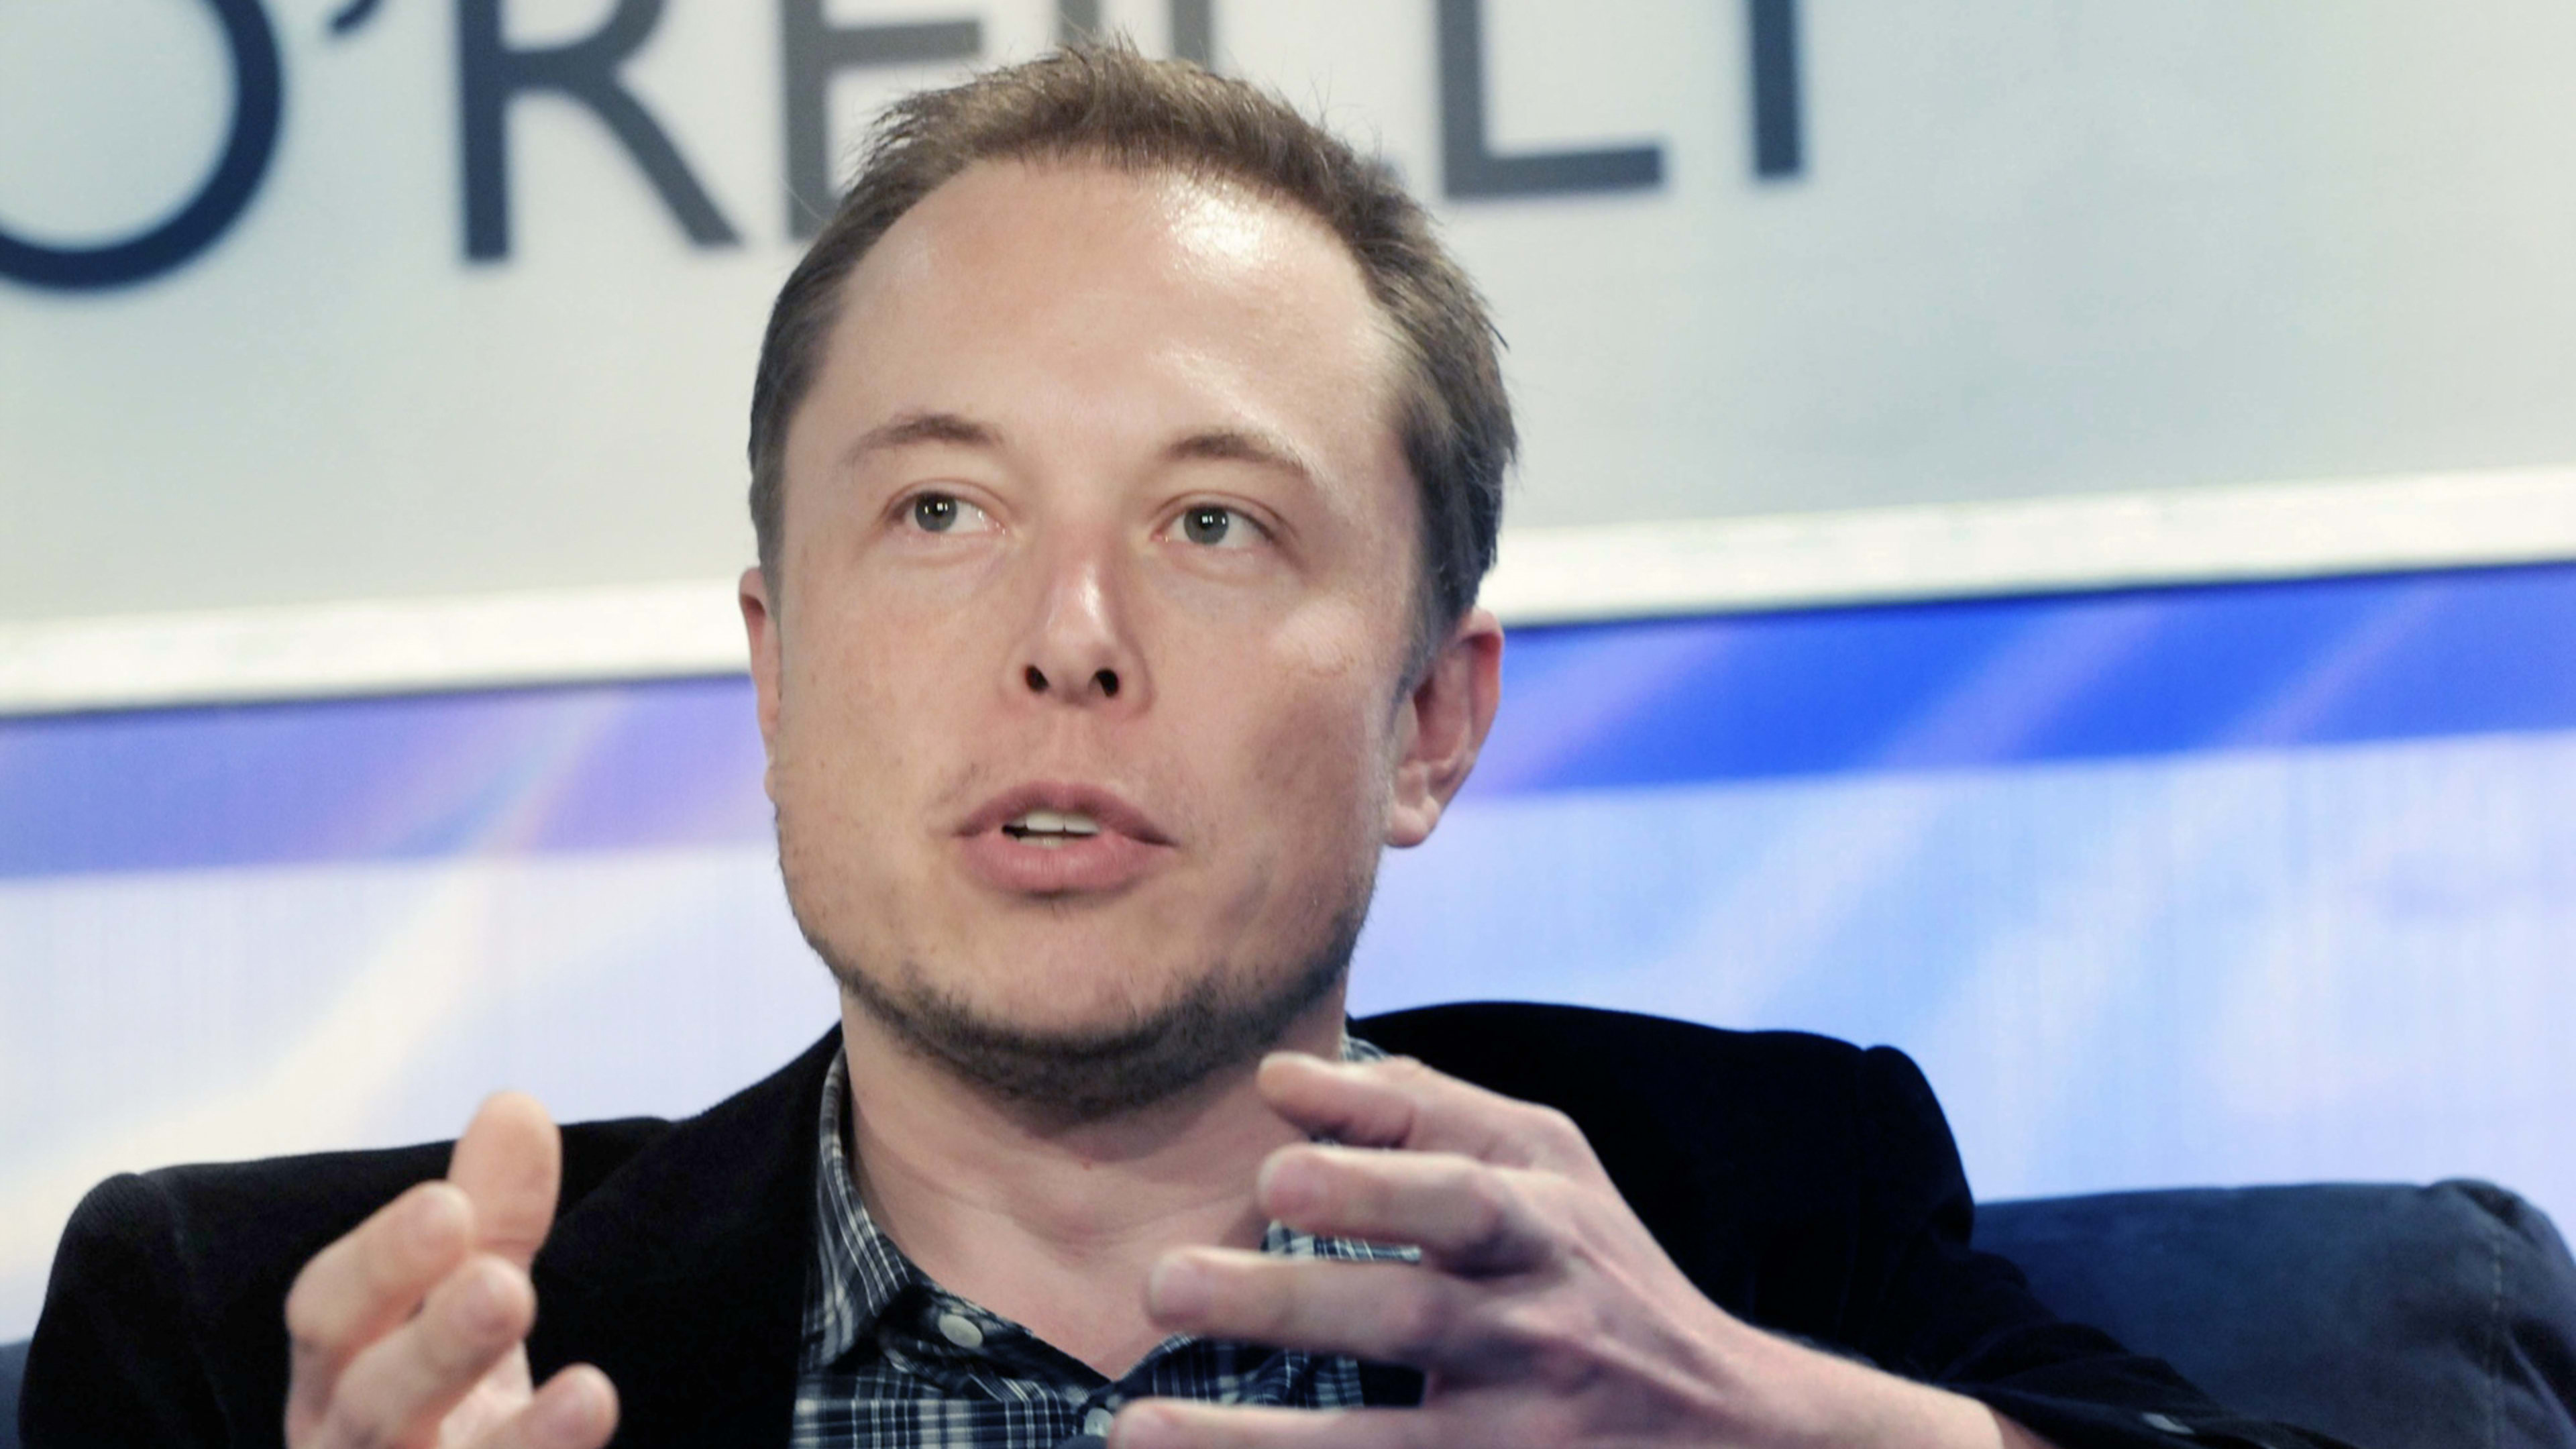 Elon Musk: Tesla in “delivery logistics hell”